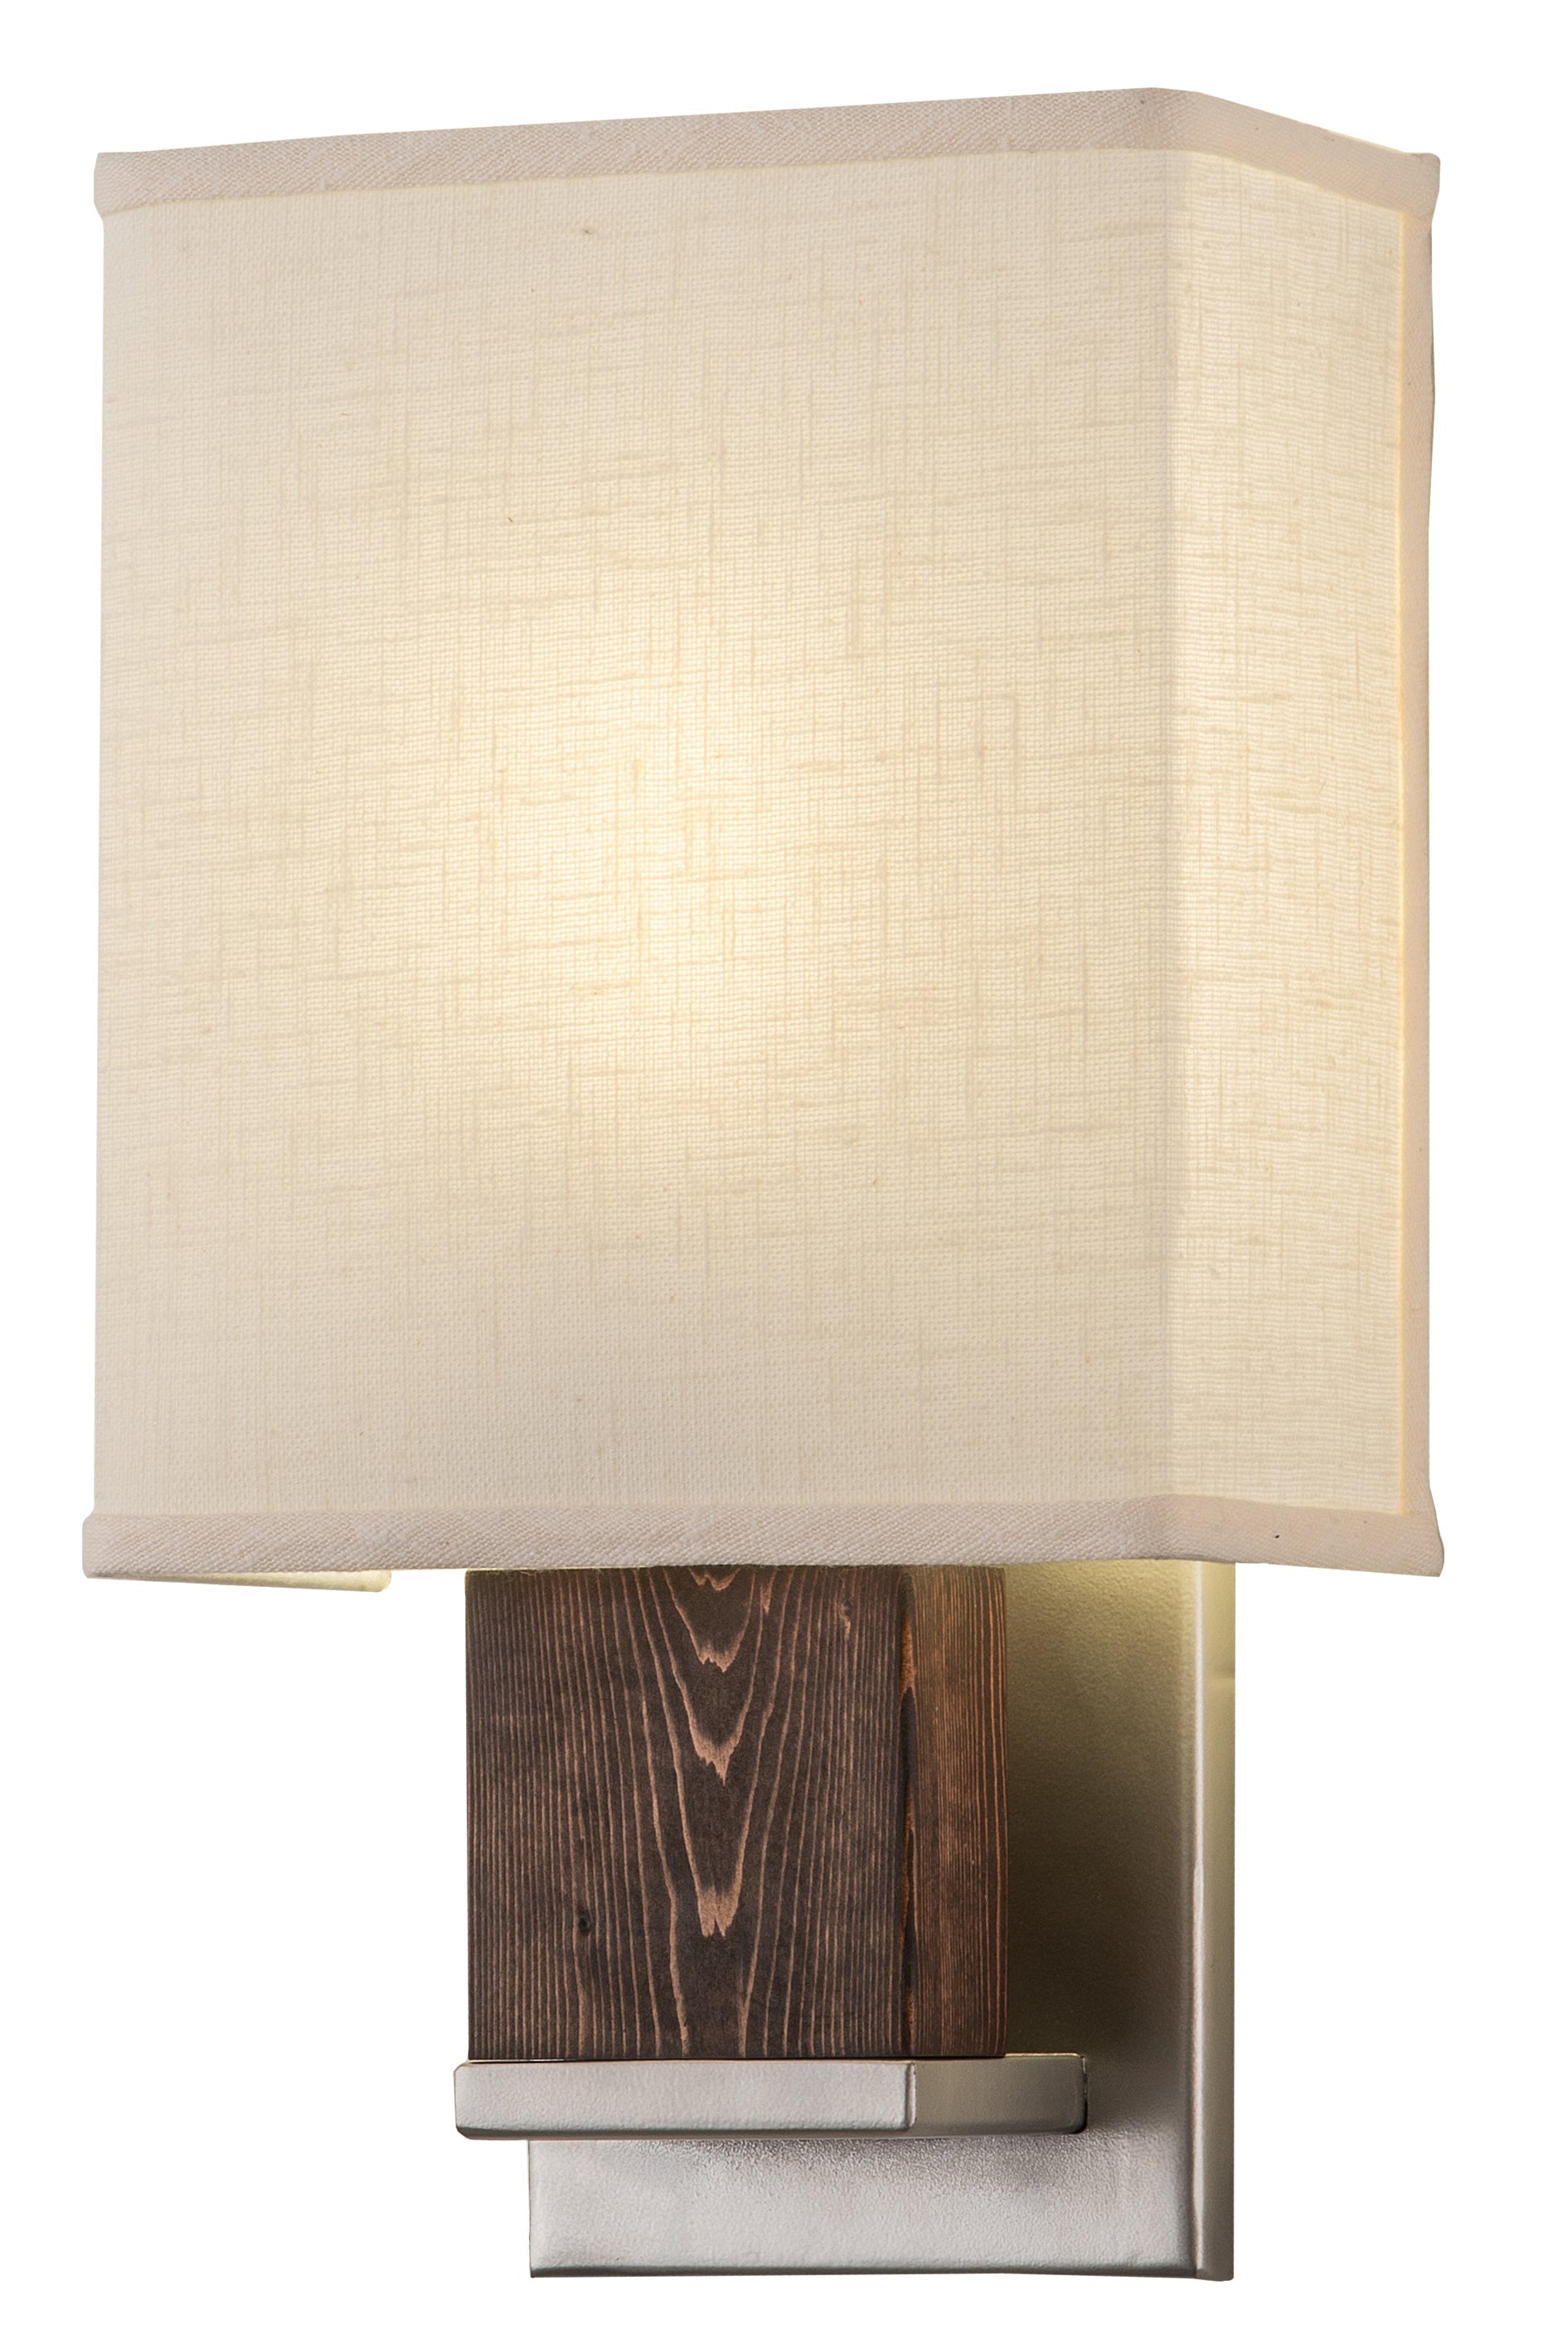 8" Navesink Wall Sconce by 2nd Ave Lighting